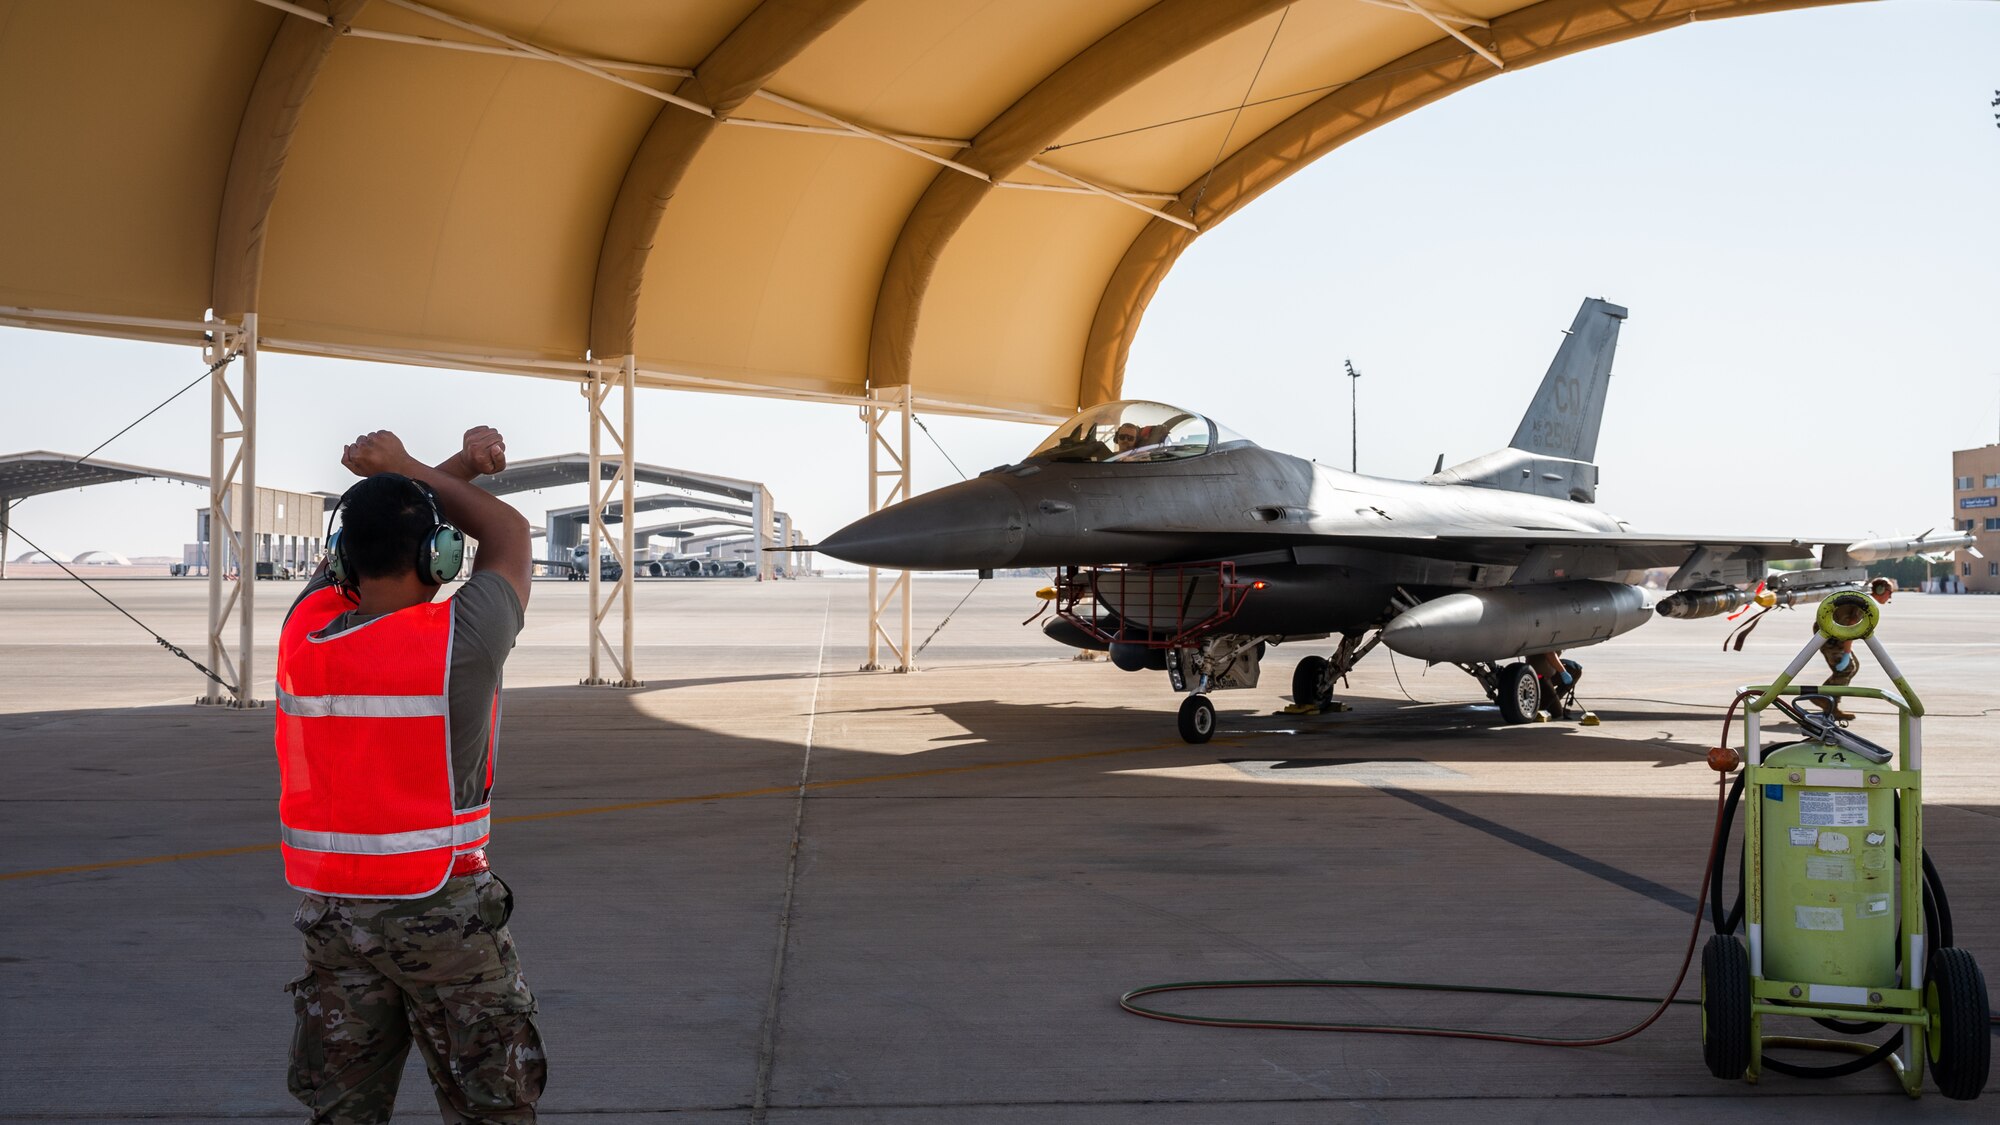 U.S. Air Force Staff Sgt. Dexter Ibasan, 379th Expeditionary Maintenance Squadron repair and reclamation craftsman simulates marshalling an F-16 Fighting Falcon at Prince Sultan Air Base, Kingdom of Saudi Arabia, Nov. 27, 2021. Isaban and other Airmen from the 379th EMXS traveled to PSAB to take part in integrated hot-pit training with Airmen from the 378th EMXS. (U.S. Air Force photo by Senior Airman Jacob B. Wrightsman)